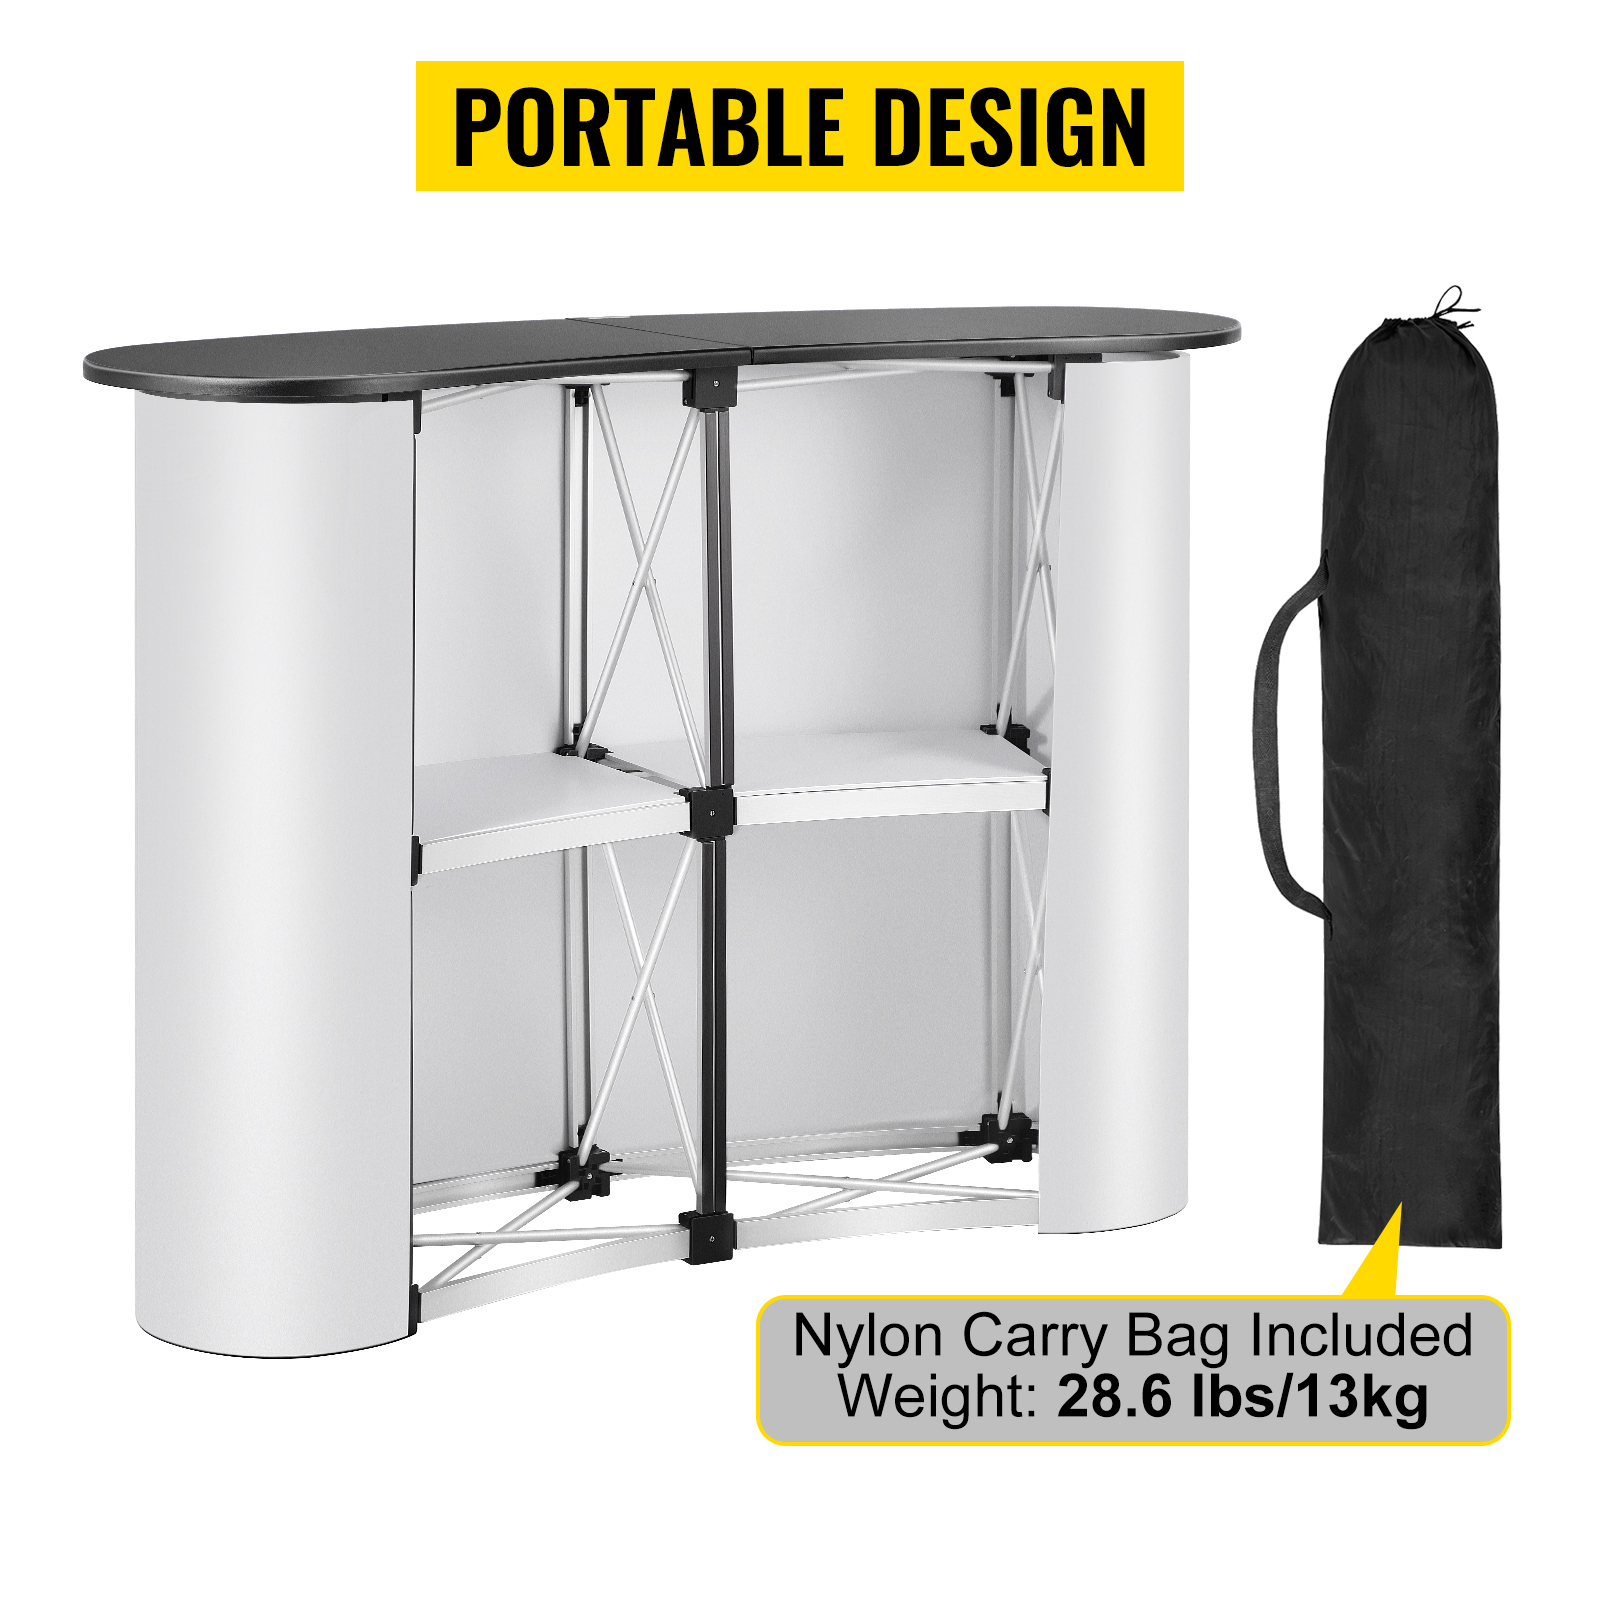 Exert Political tower VEVOR Portable Tradeshow Podium Table Display Exhibition Counter Stand Booth  Fair with Wall Bags 51" X 15.7" X 38.5" | VEVOR US